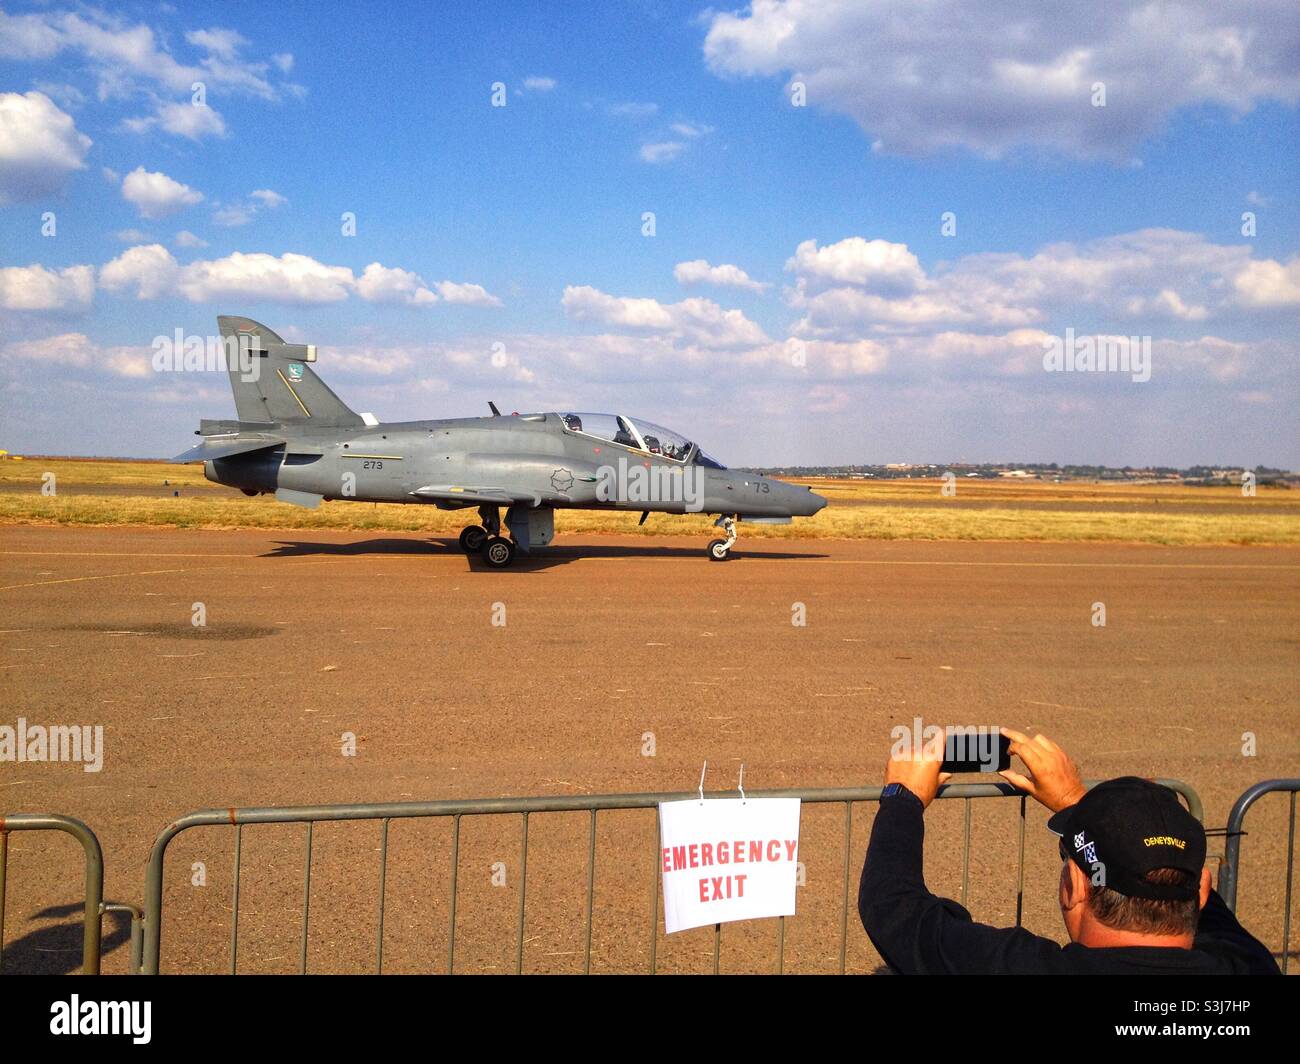 A spectator taking a photo of a fighter jet at an air show in South Africa Stock Photo